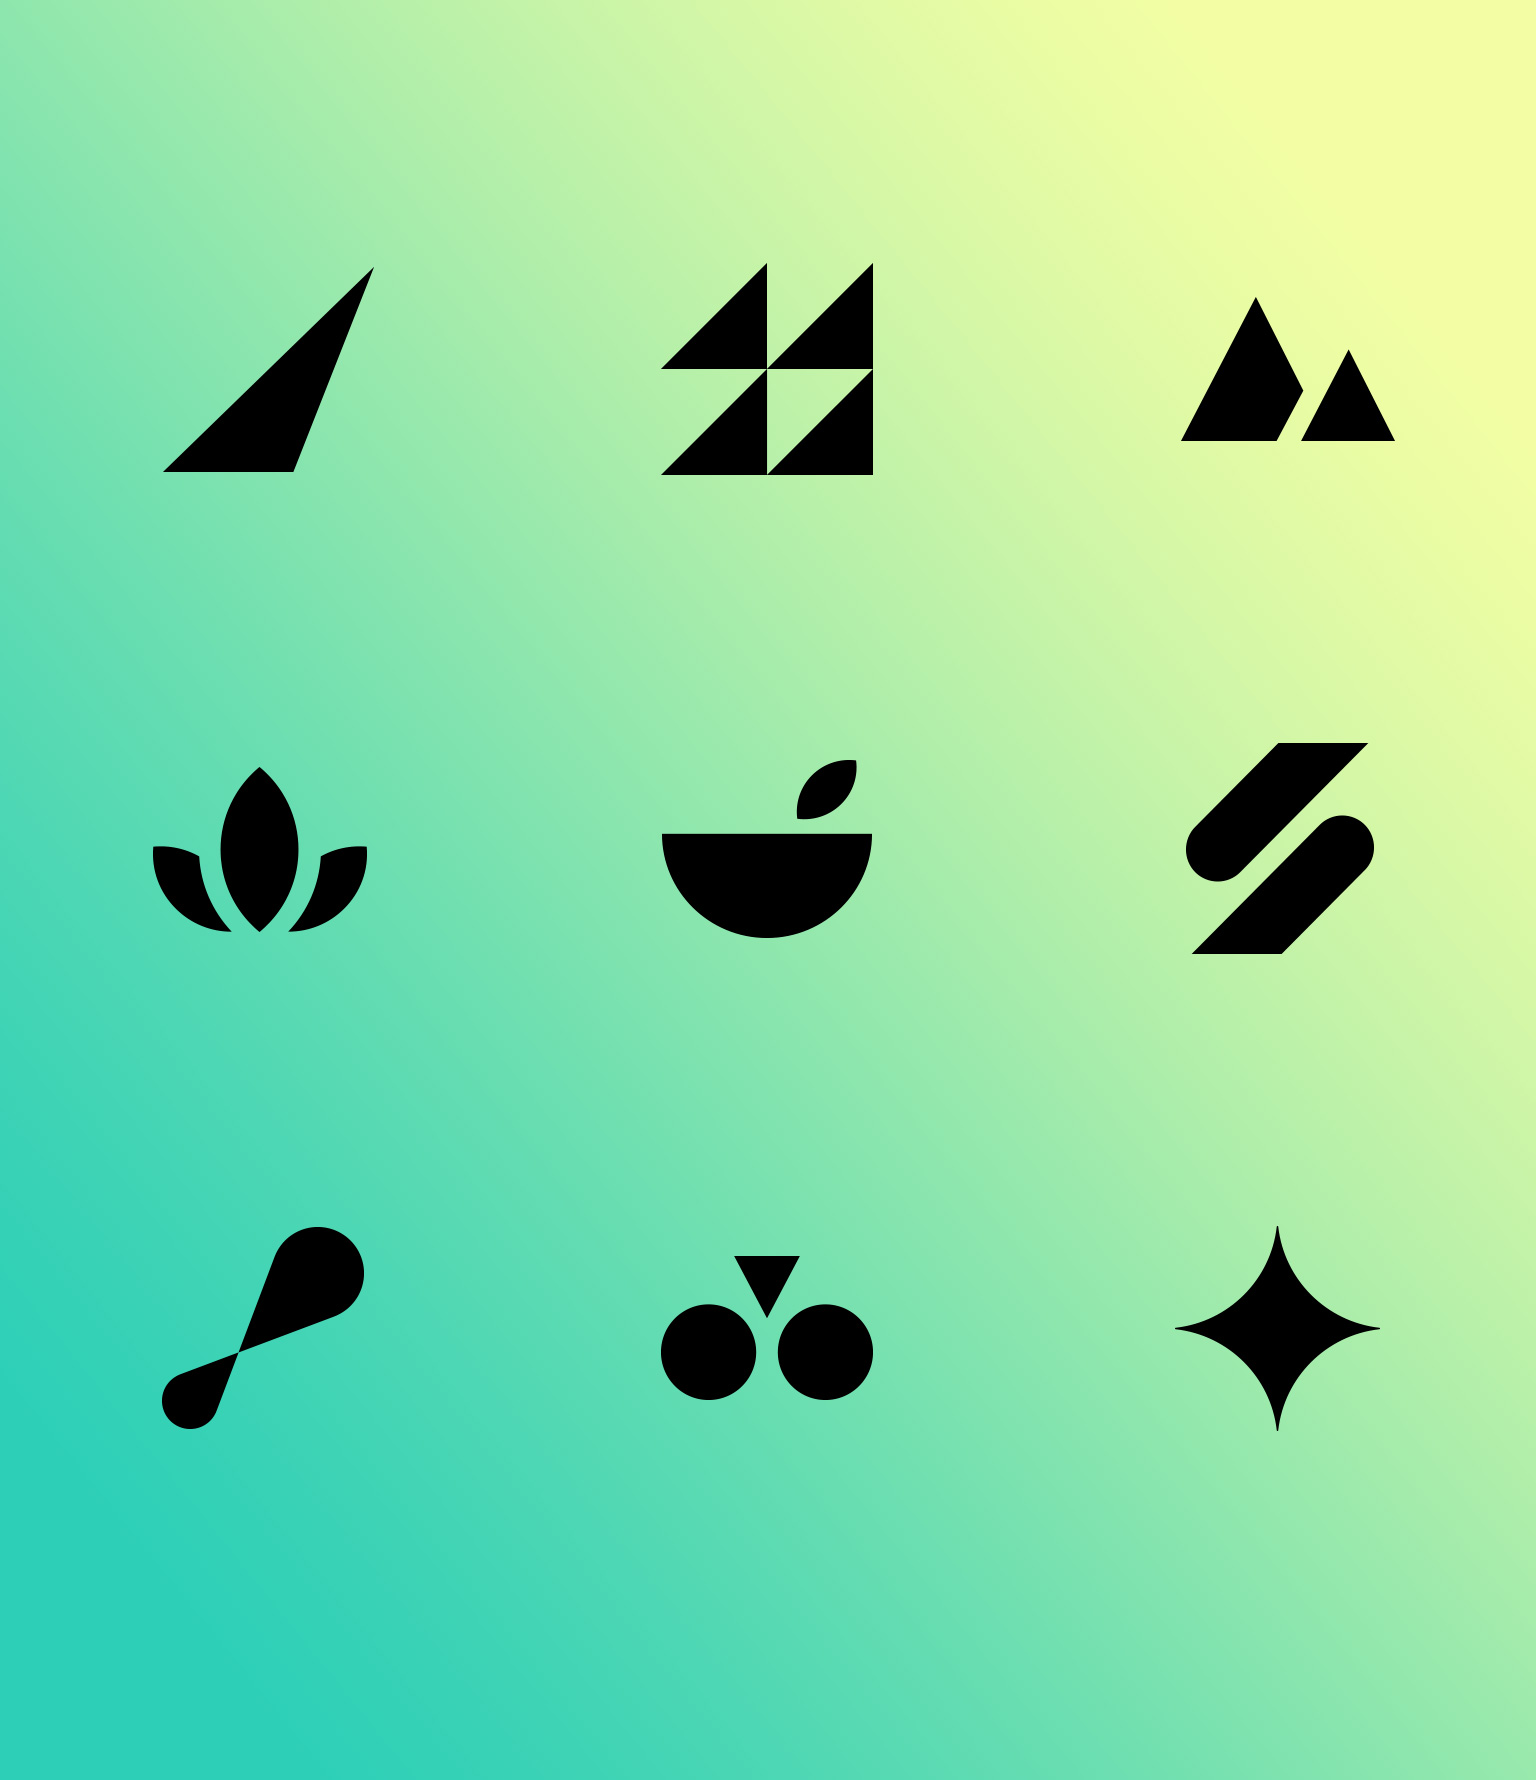 12 abstract icons in black over yellow and aqua gradient photo of runner